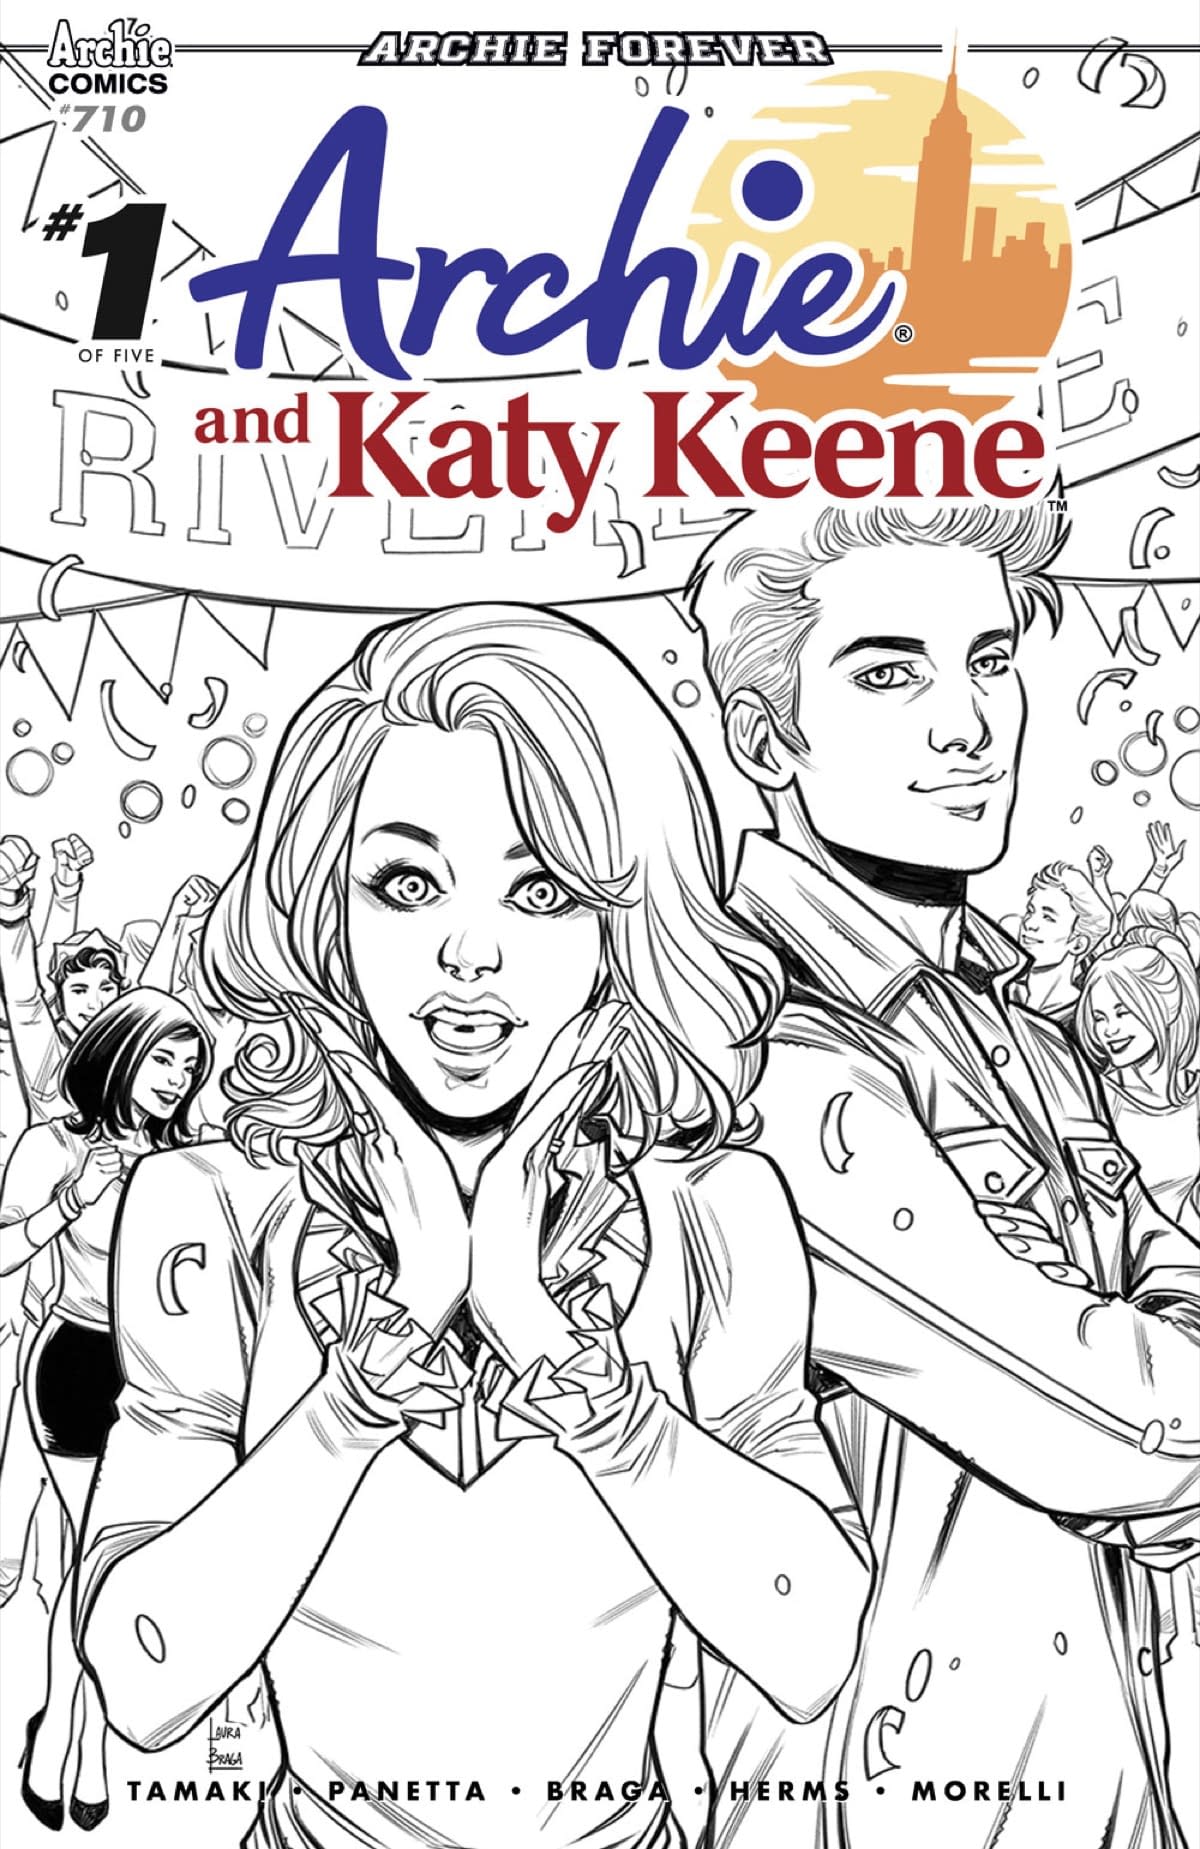 Archie to Relaunch as Archie and Katy Keene as Titular Gigolo Gets New Love Interest